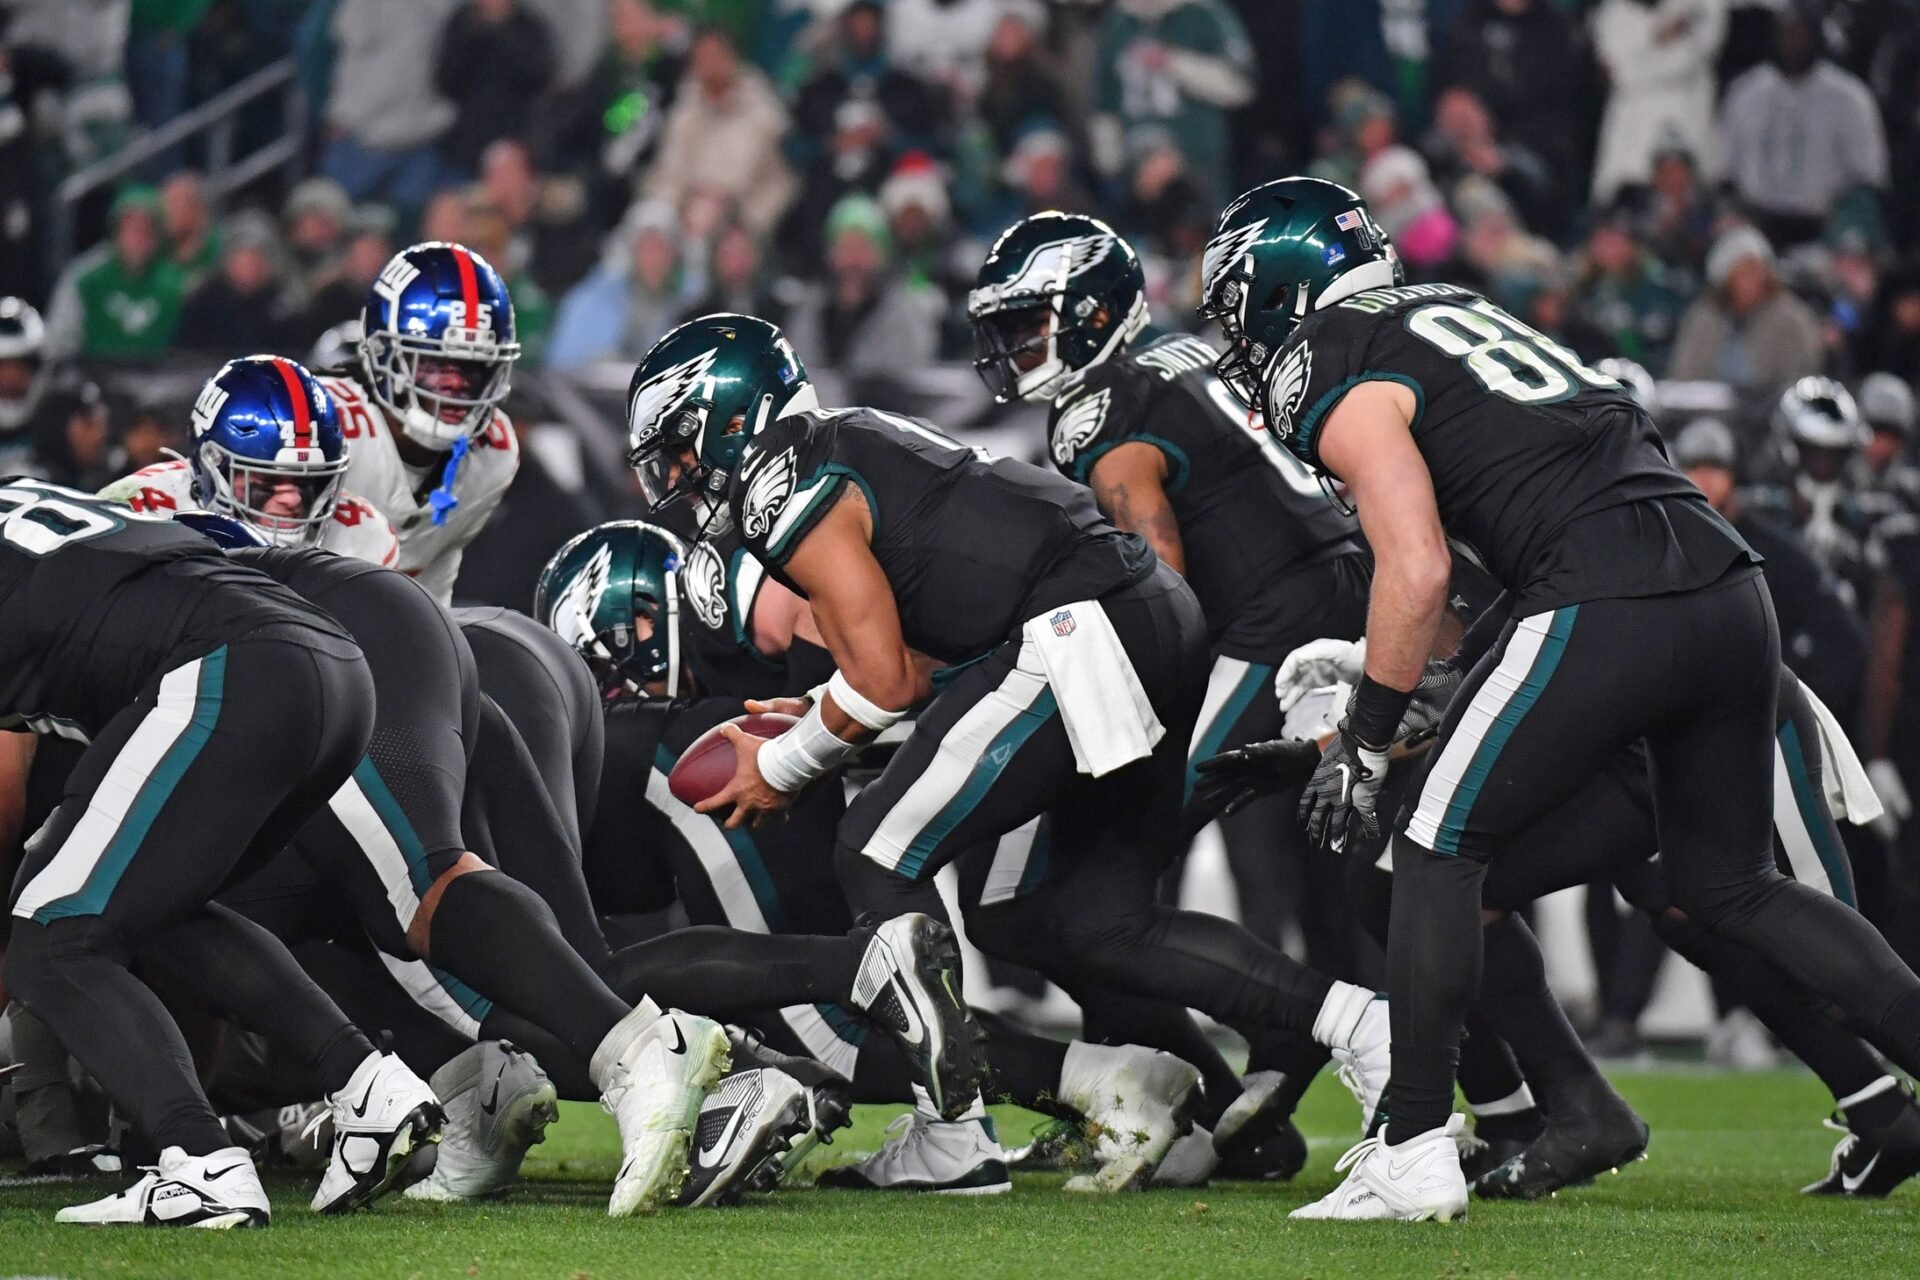 https://static.profootballnetwork.com/wp-content/uploads/2024/03/21164712/Why-the-Philadelphia-Eagles-Tush-Push-Isnt-Going-Anywhere-At-Least-This-Year-1920x1280.jpg